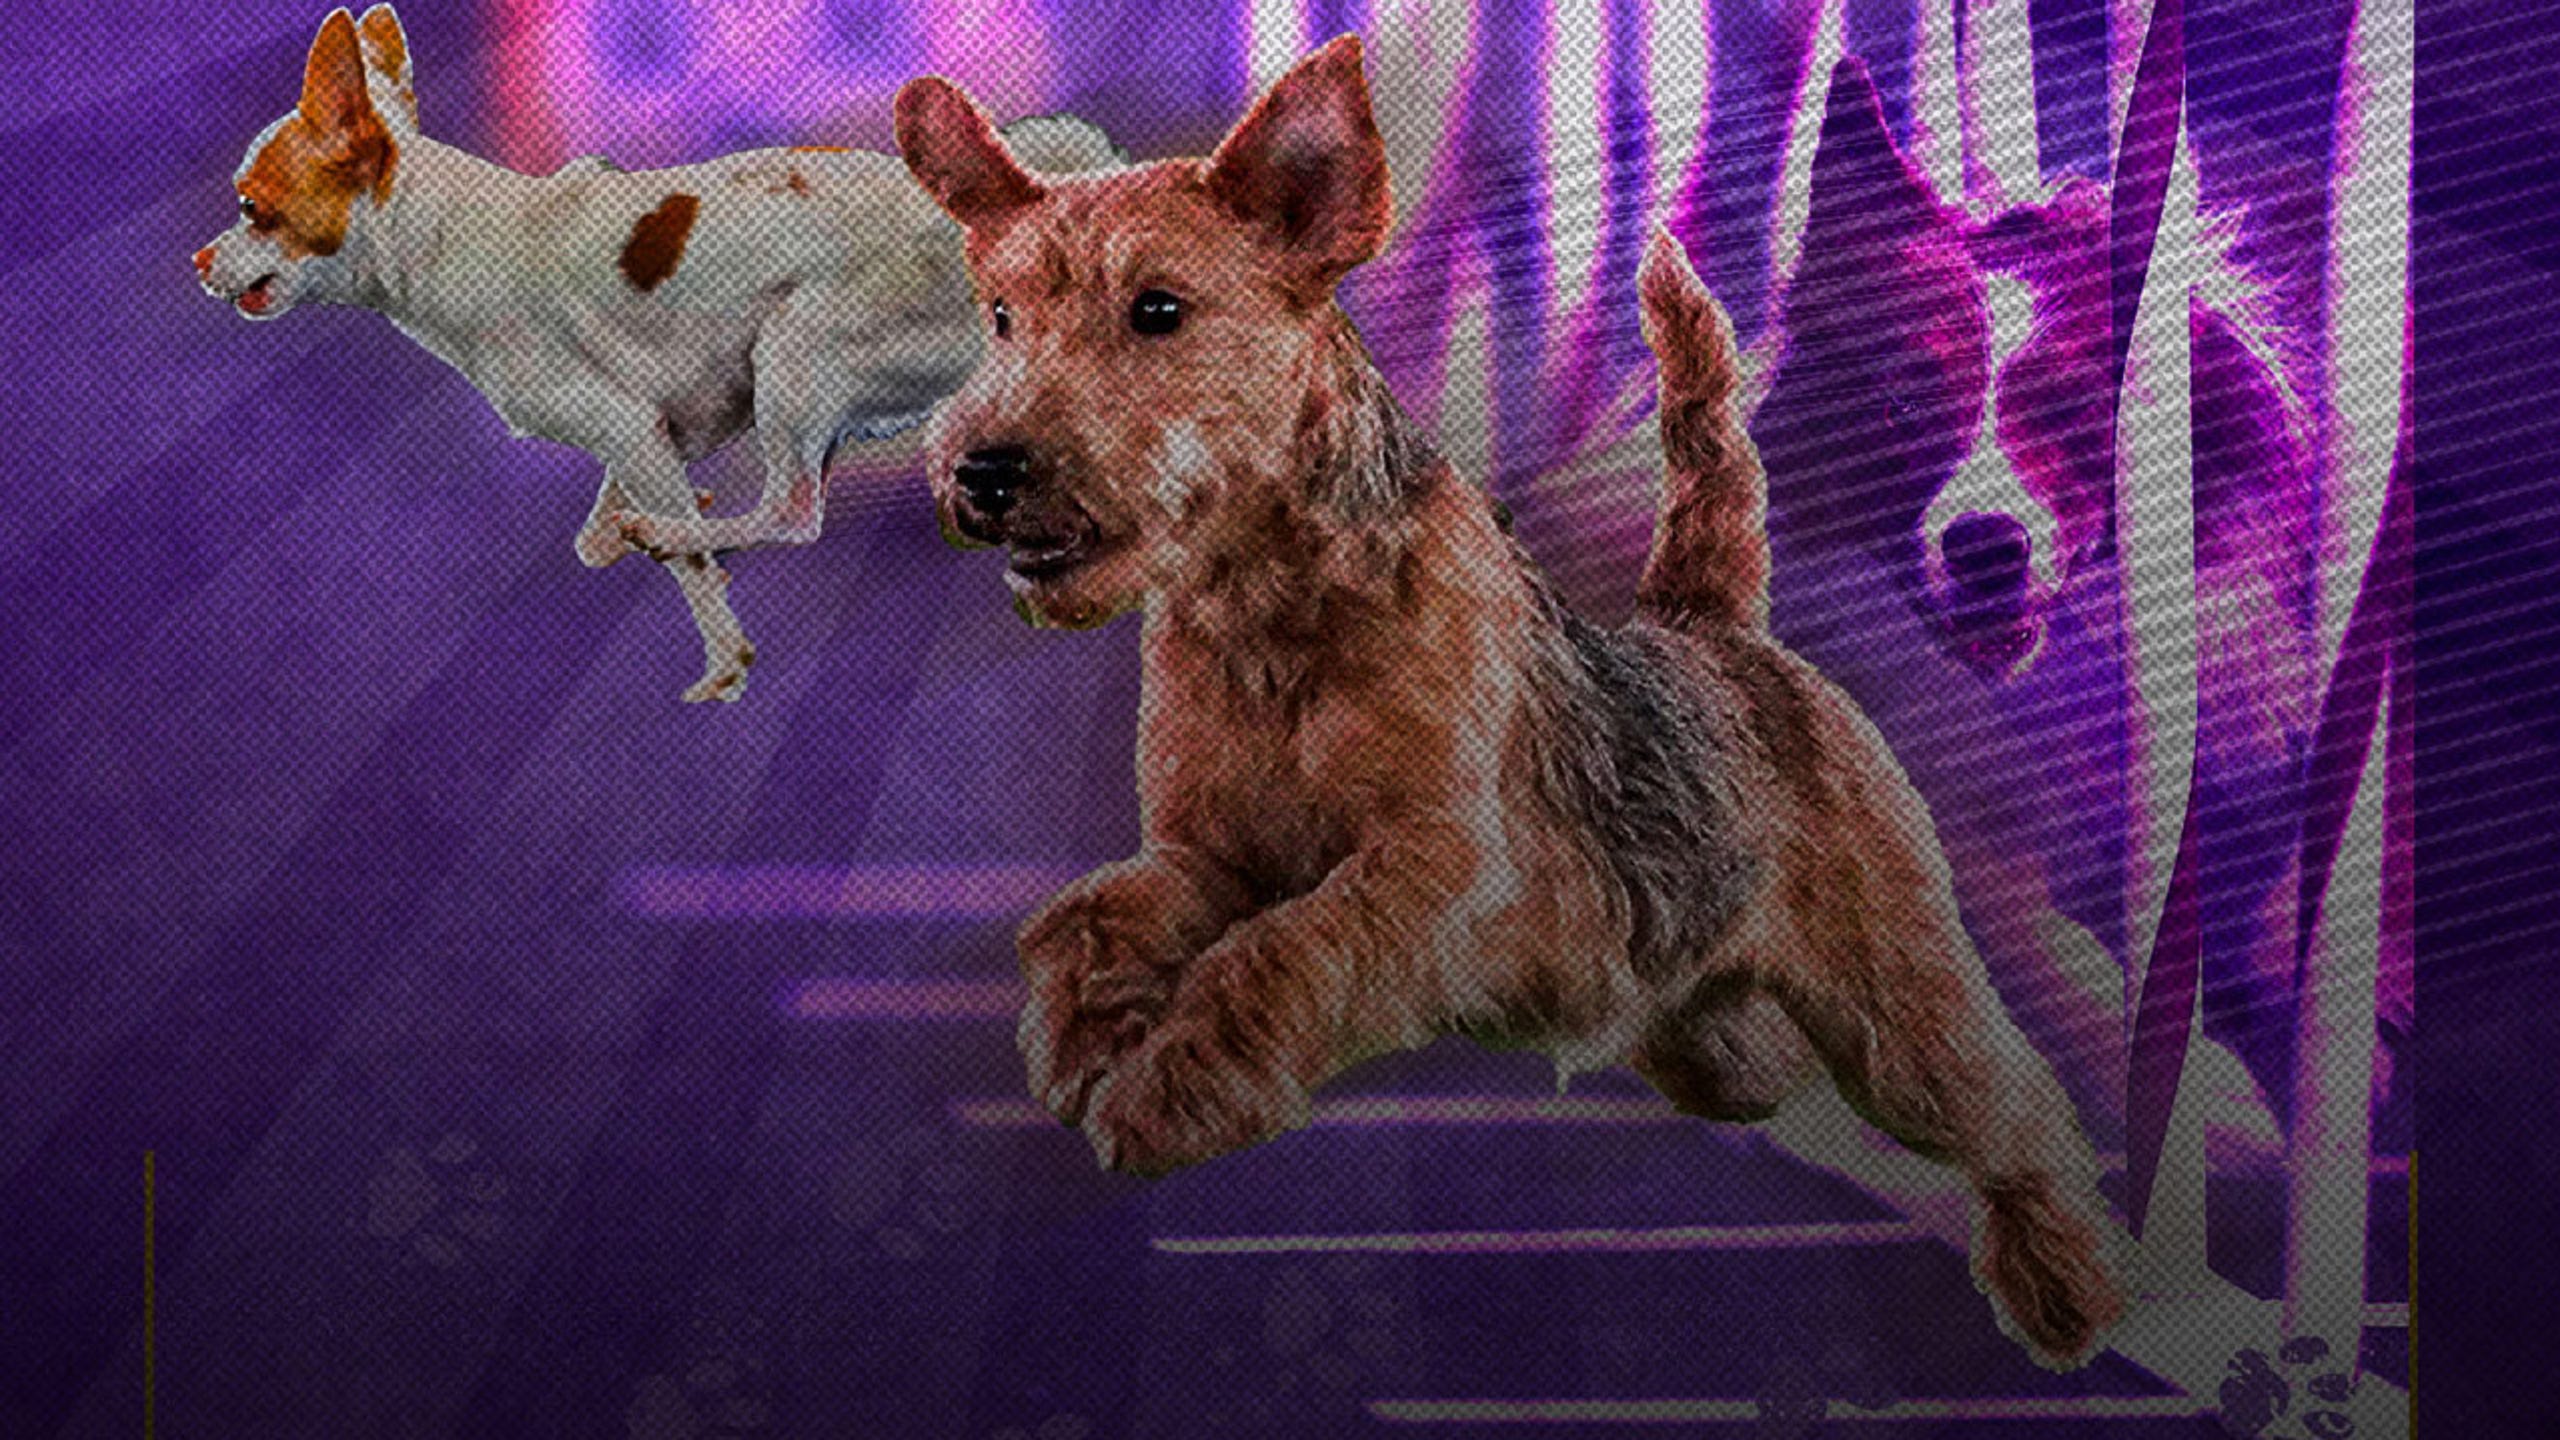 2021 Westminster Dog Show Agility Competition: Verb steals show as